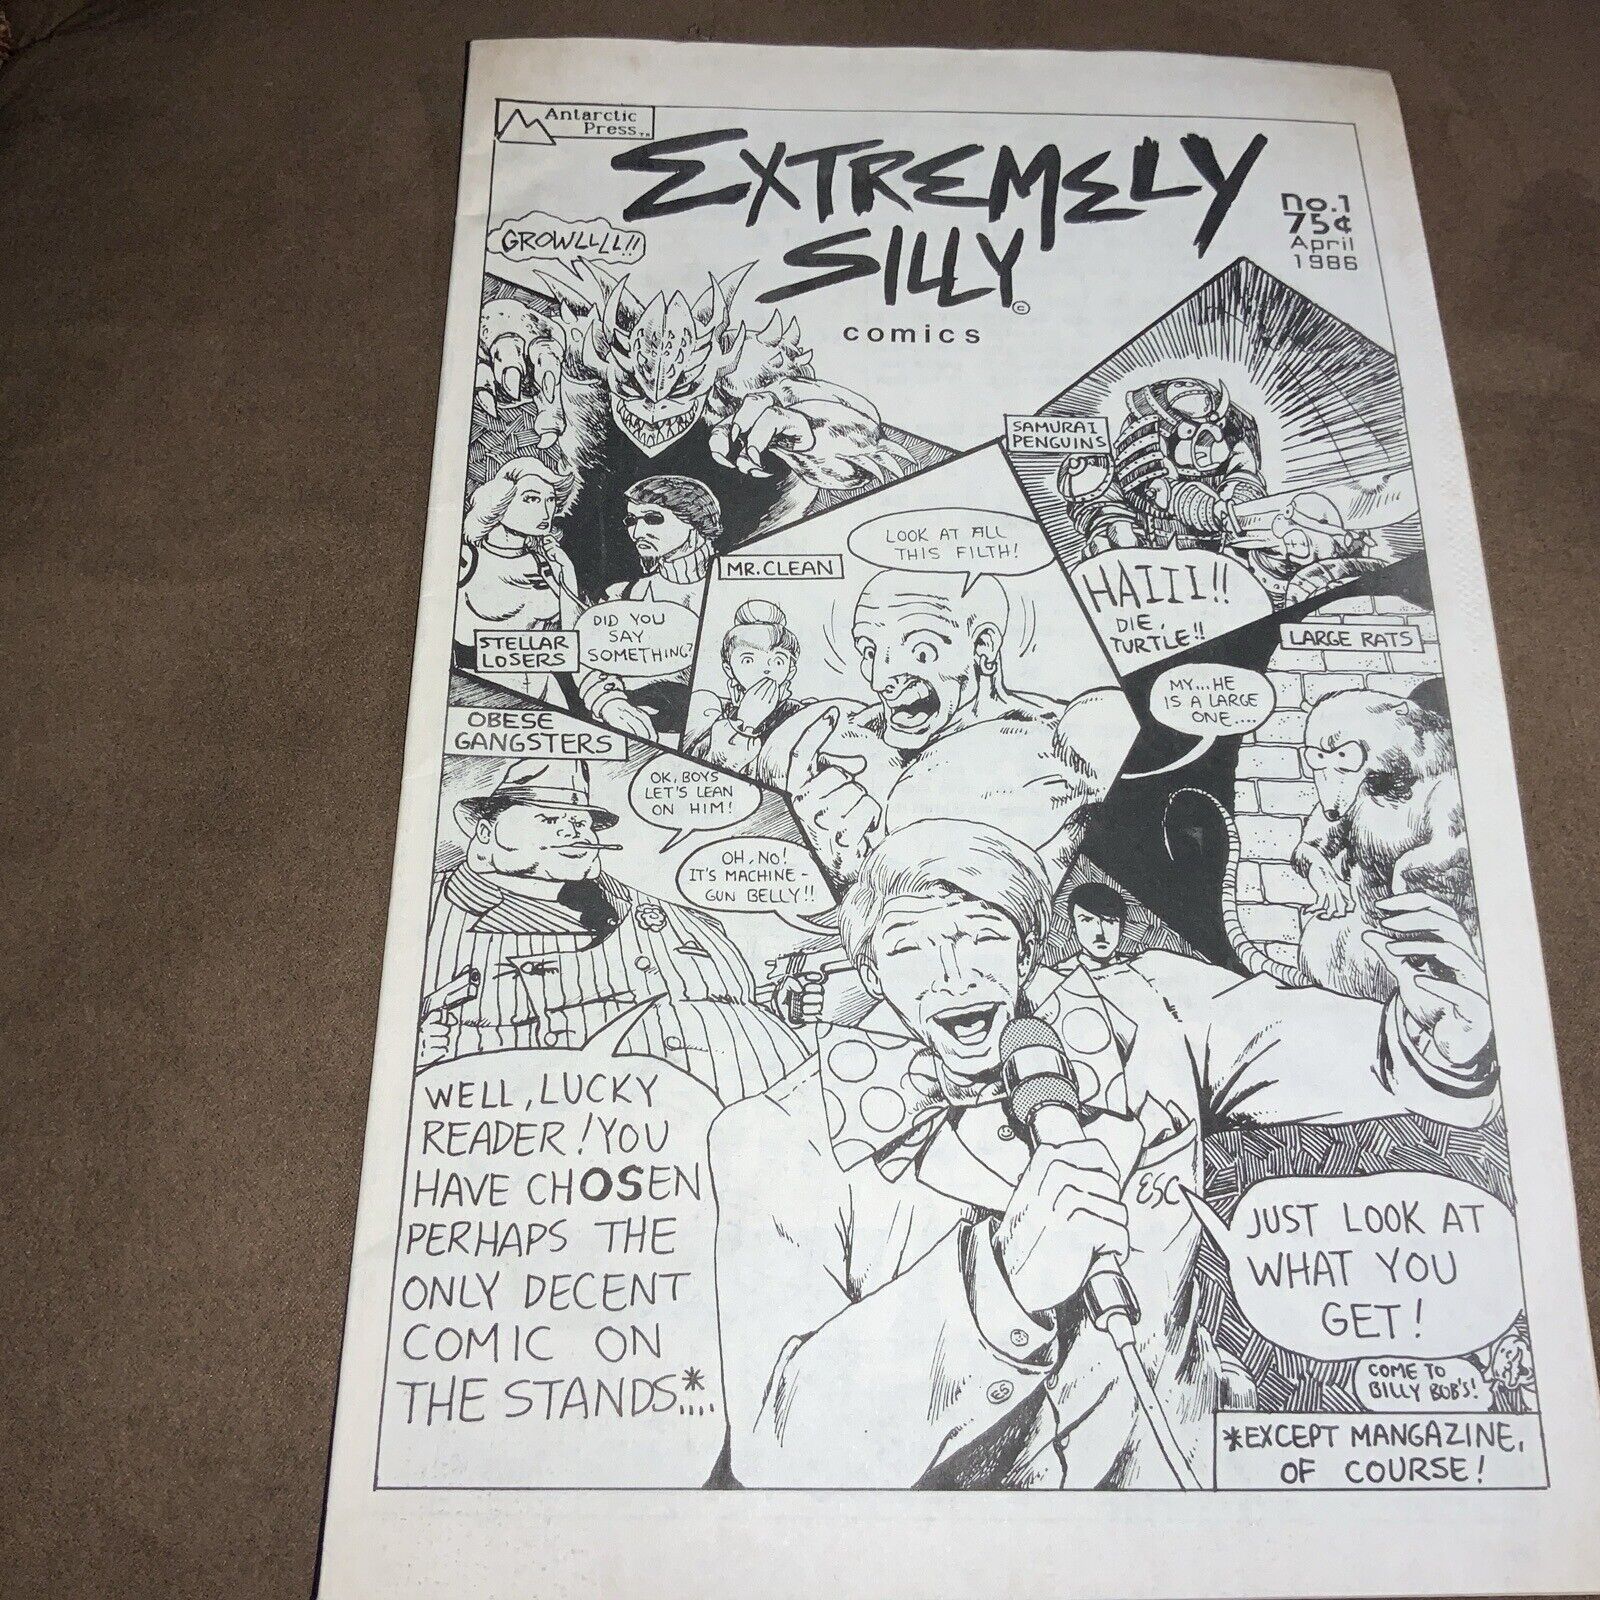 Extremely Silly Comics #1 VG  1986